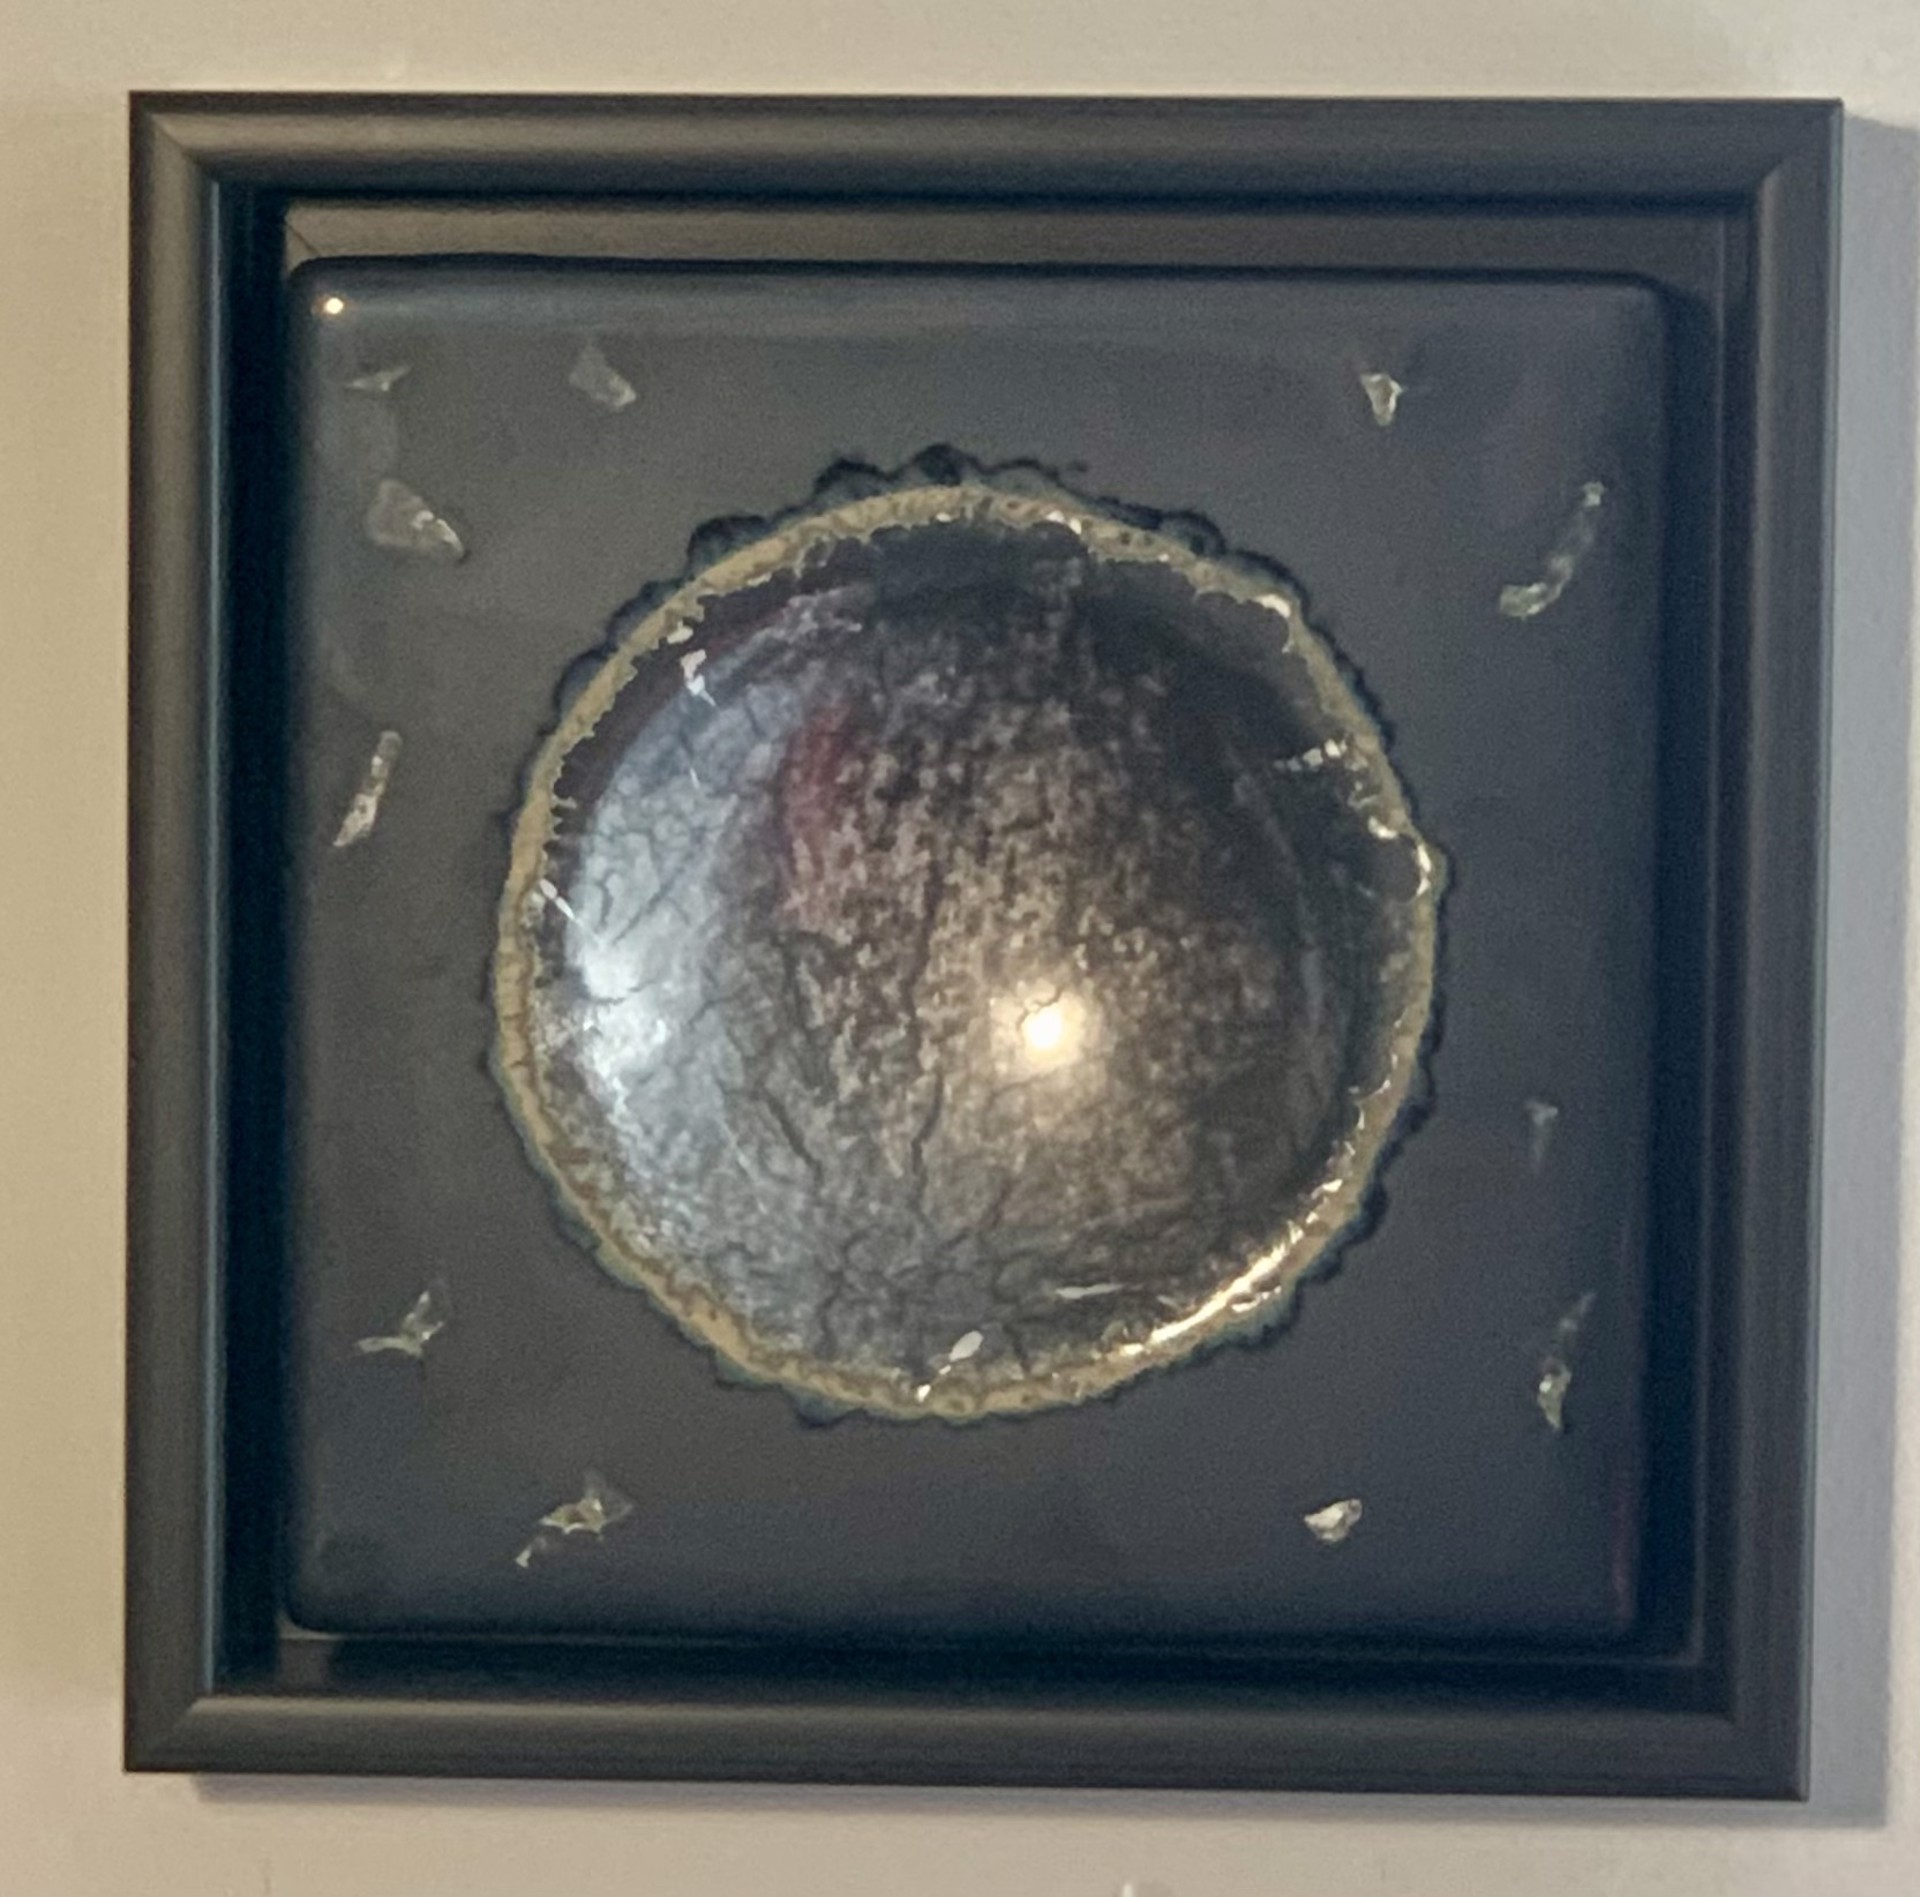 Celestial Series |  Crater 1001 | Fused Glass & Silver by Chris Cox